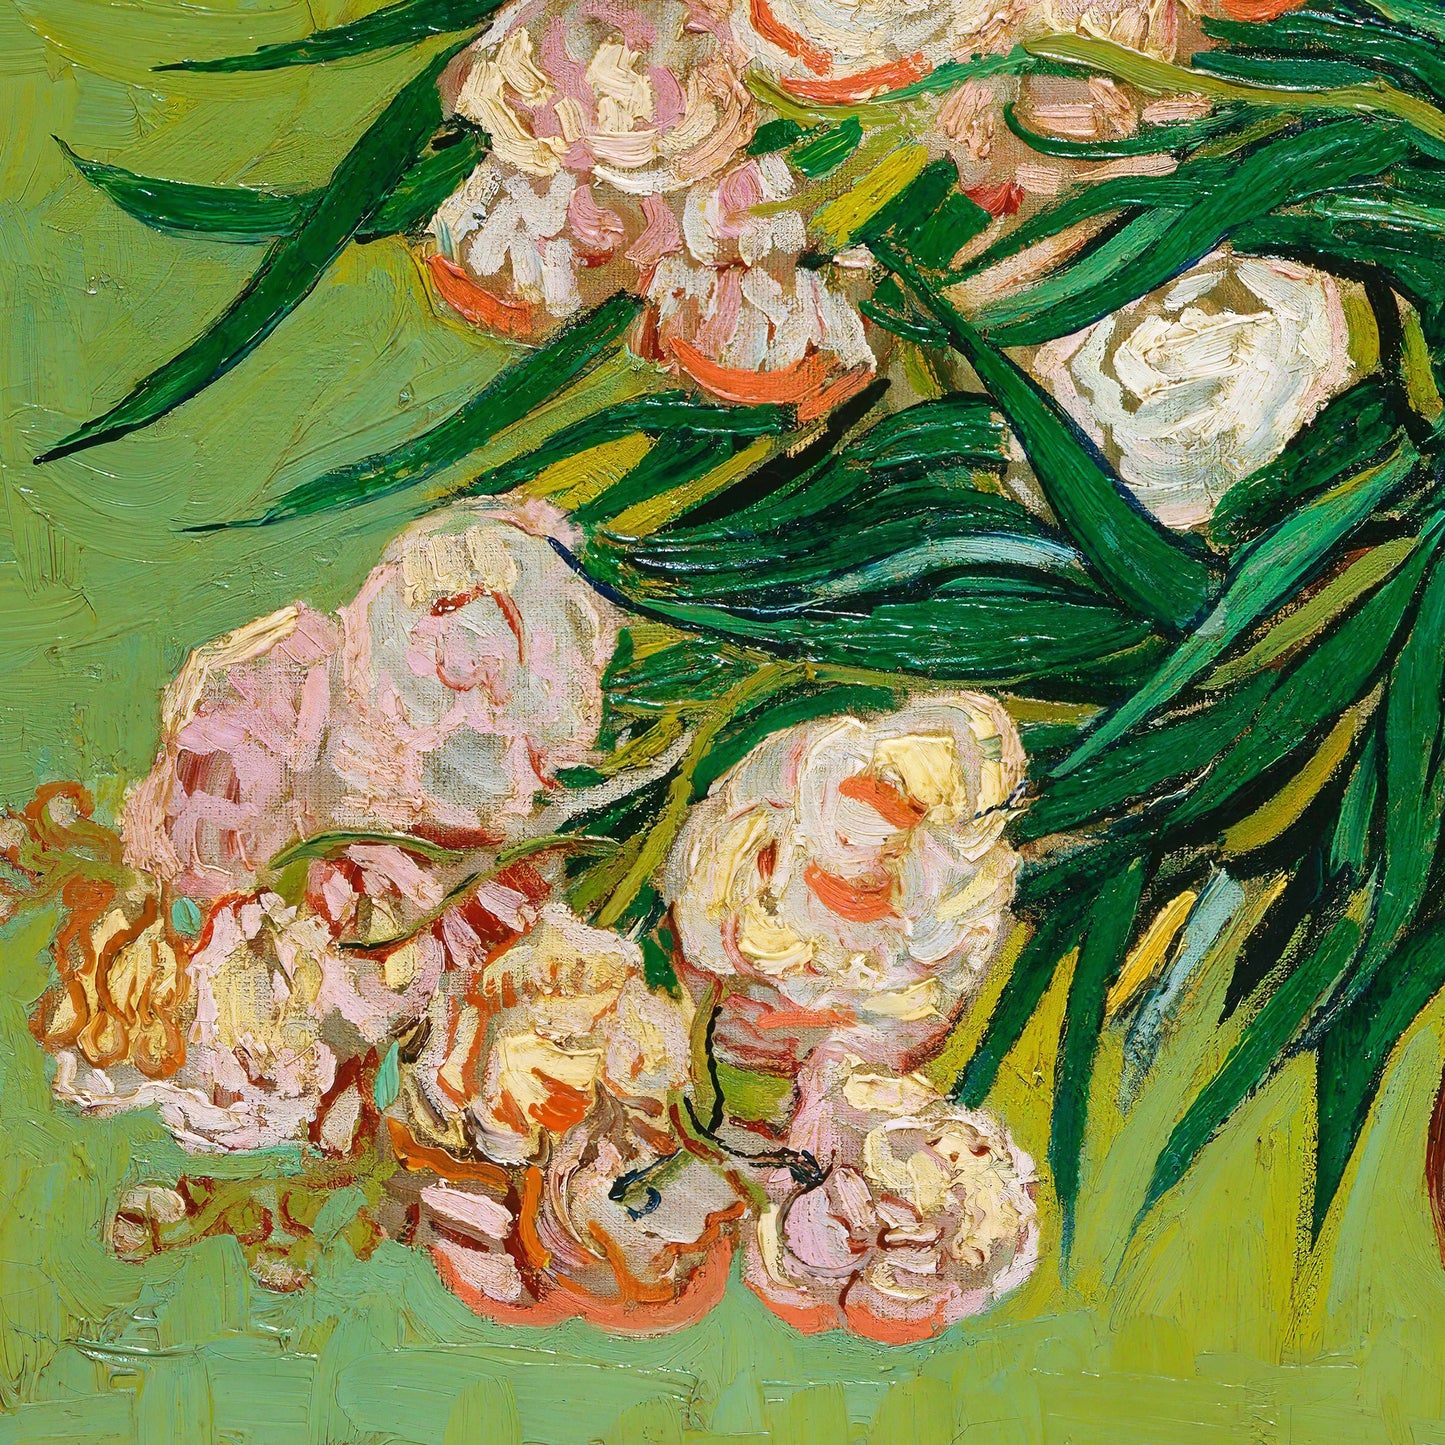 Oleanders by Vincent Van Gogh, 3d Printed with texture and brush strokes looks like original oil-painting, code:074